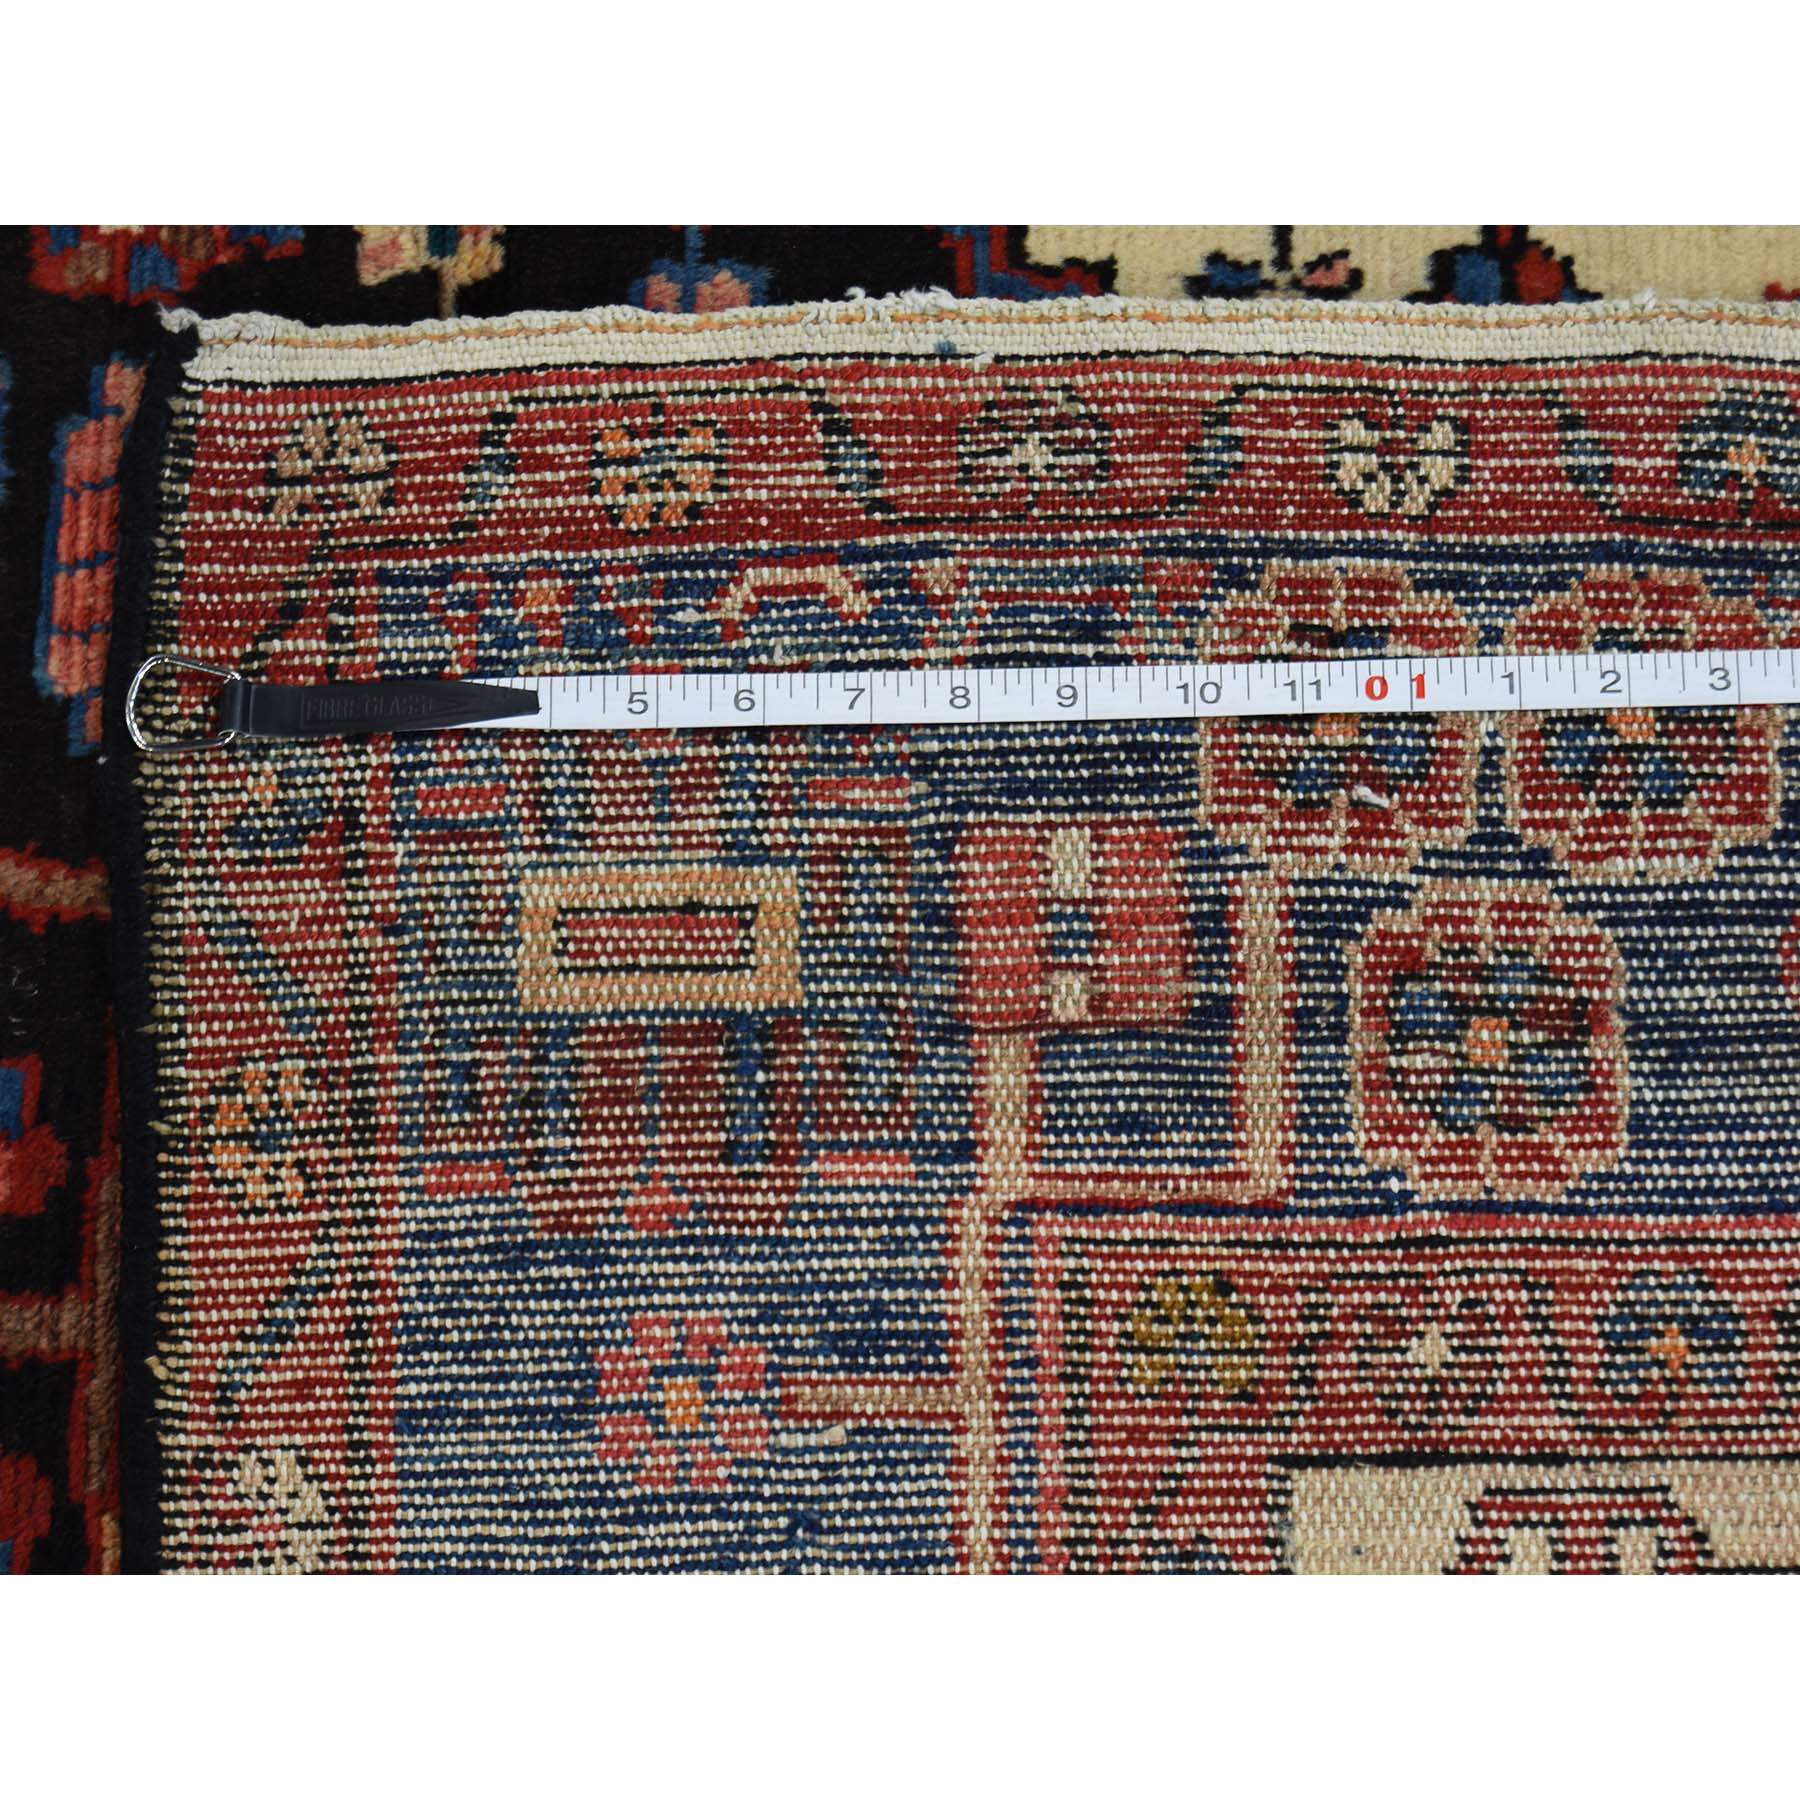 4-2--x9-6-- Hand-Knotted Semi Antique Persian Nahavand Wide Runner Rug 